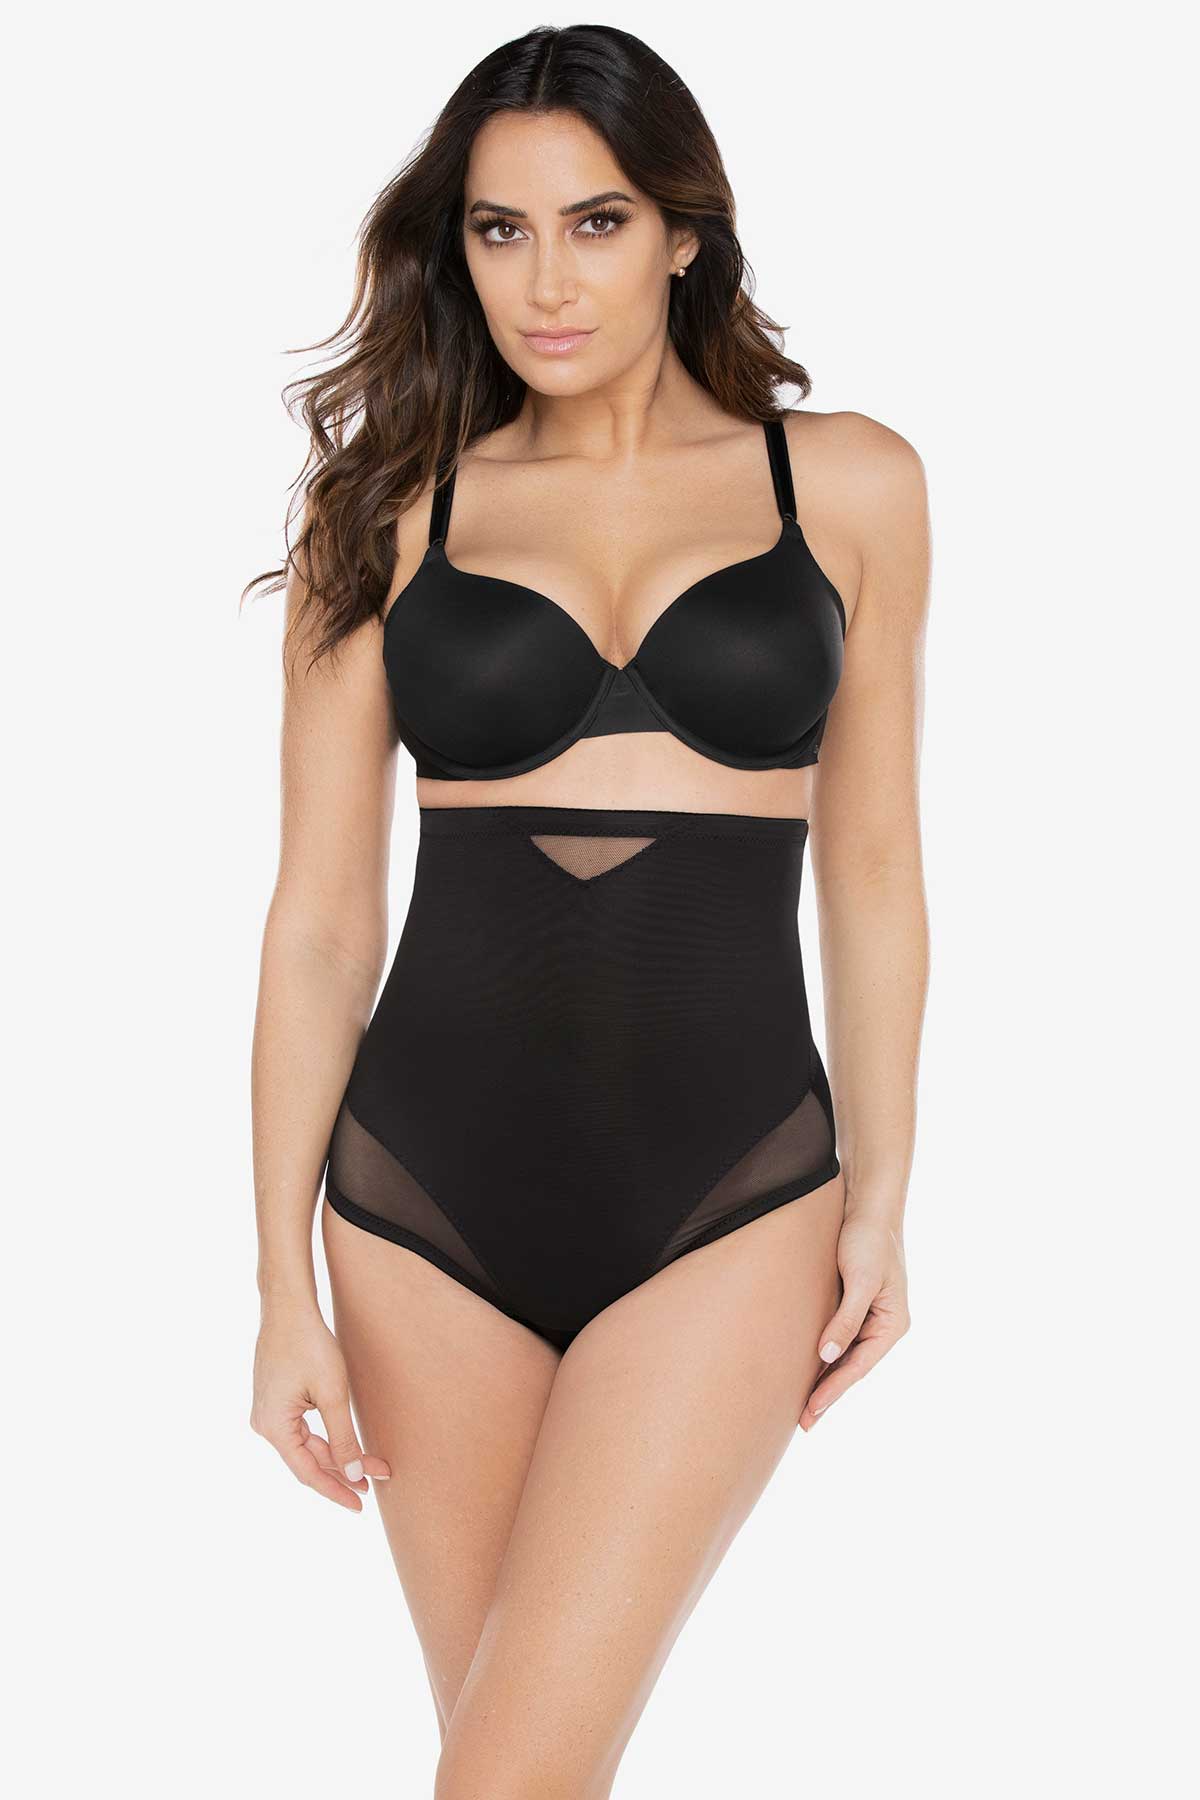 Best Selling Shapewear – Miraclesuit